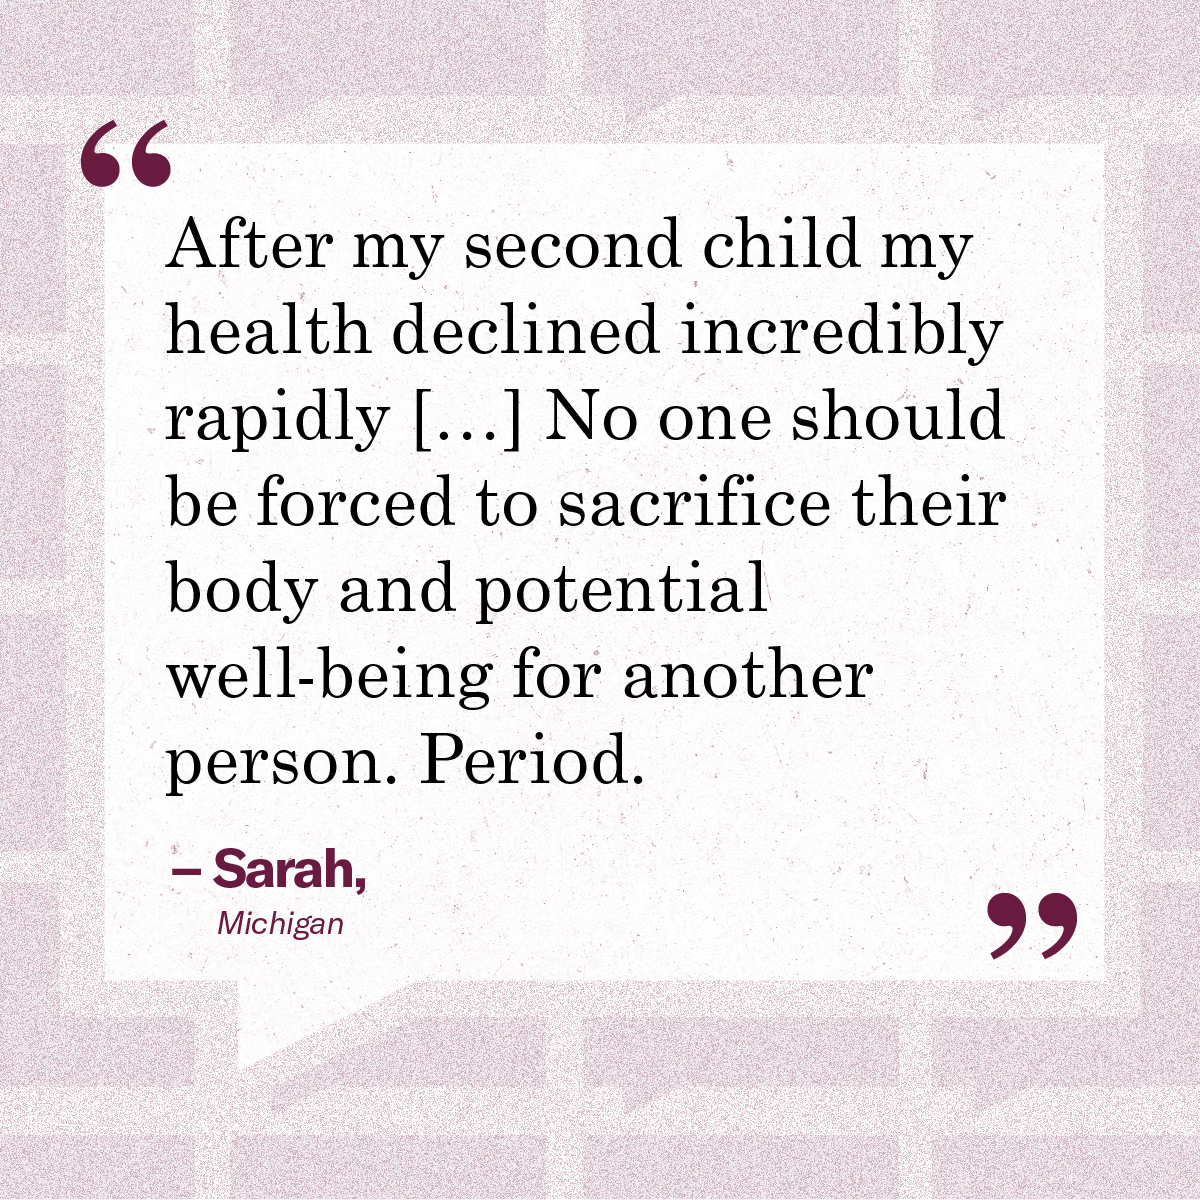 “After my second child my health declined incredibly rapidly […] No one should be forced to sacrifice their body and potential well-being for another person. Period.” – Sarah, Michigan